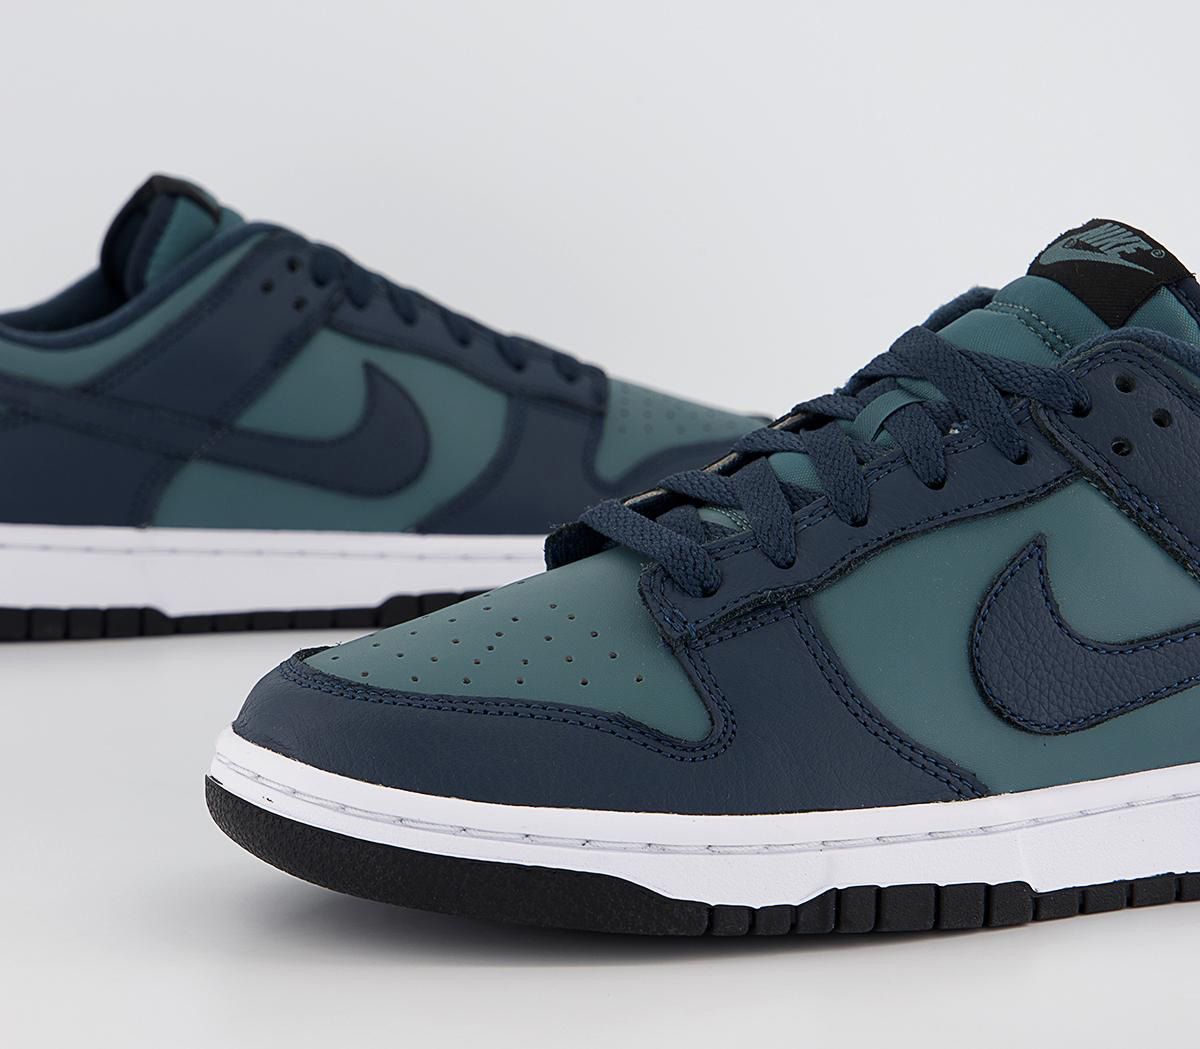 NIKE DUNK LOW IN DARK TEAL AND NAVY